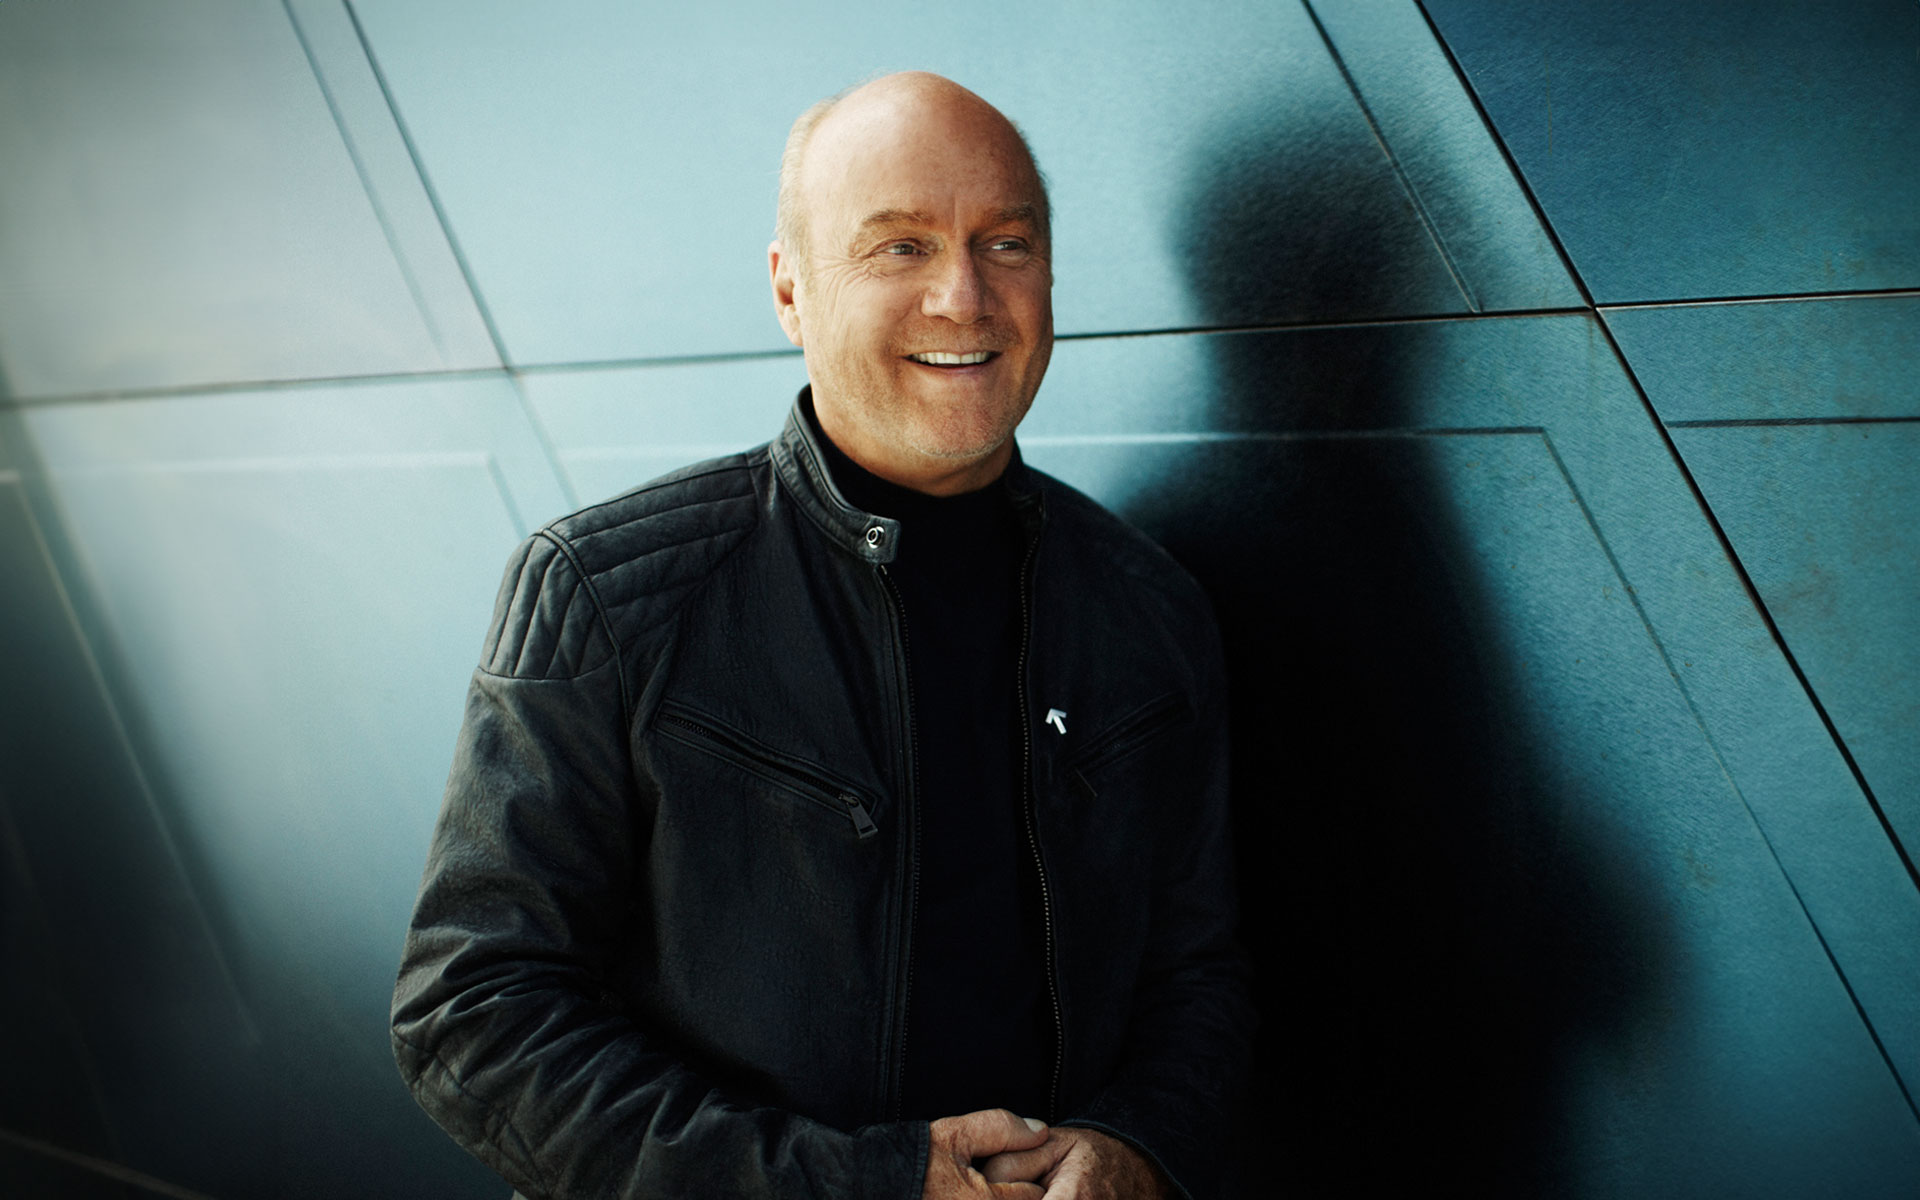 Turning the Tables: Greg Laurie Interviews Dr. James Dobson